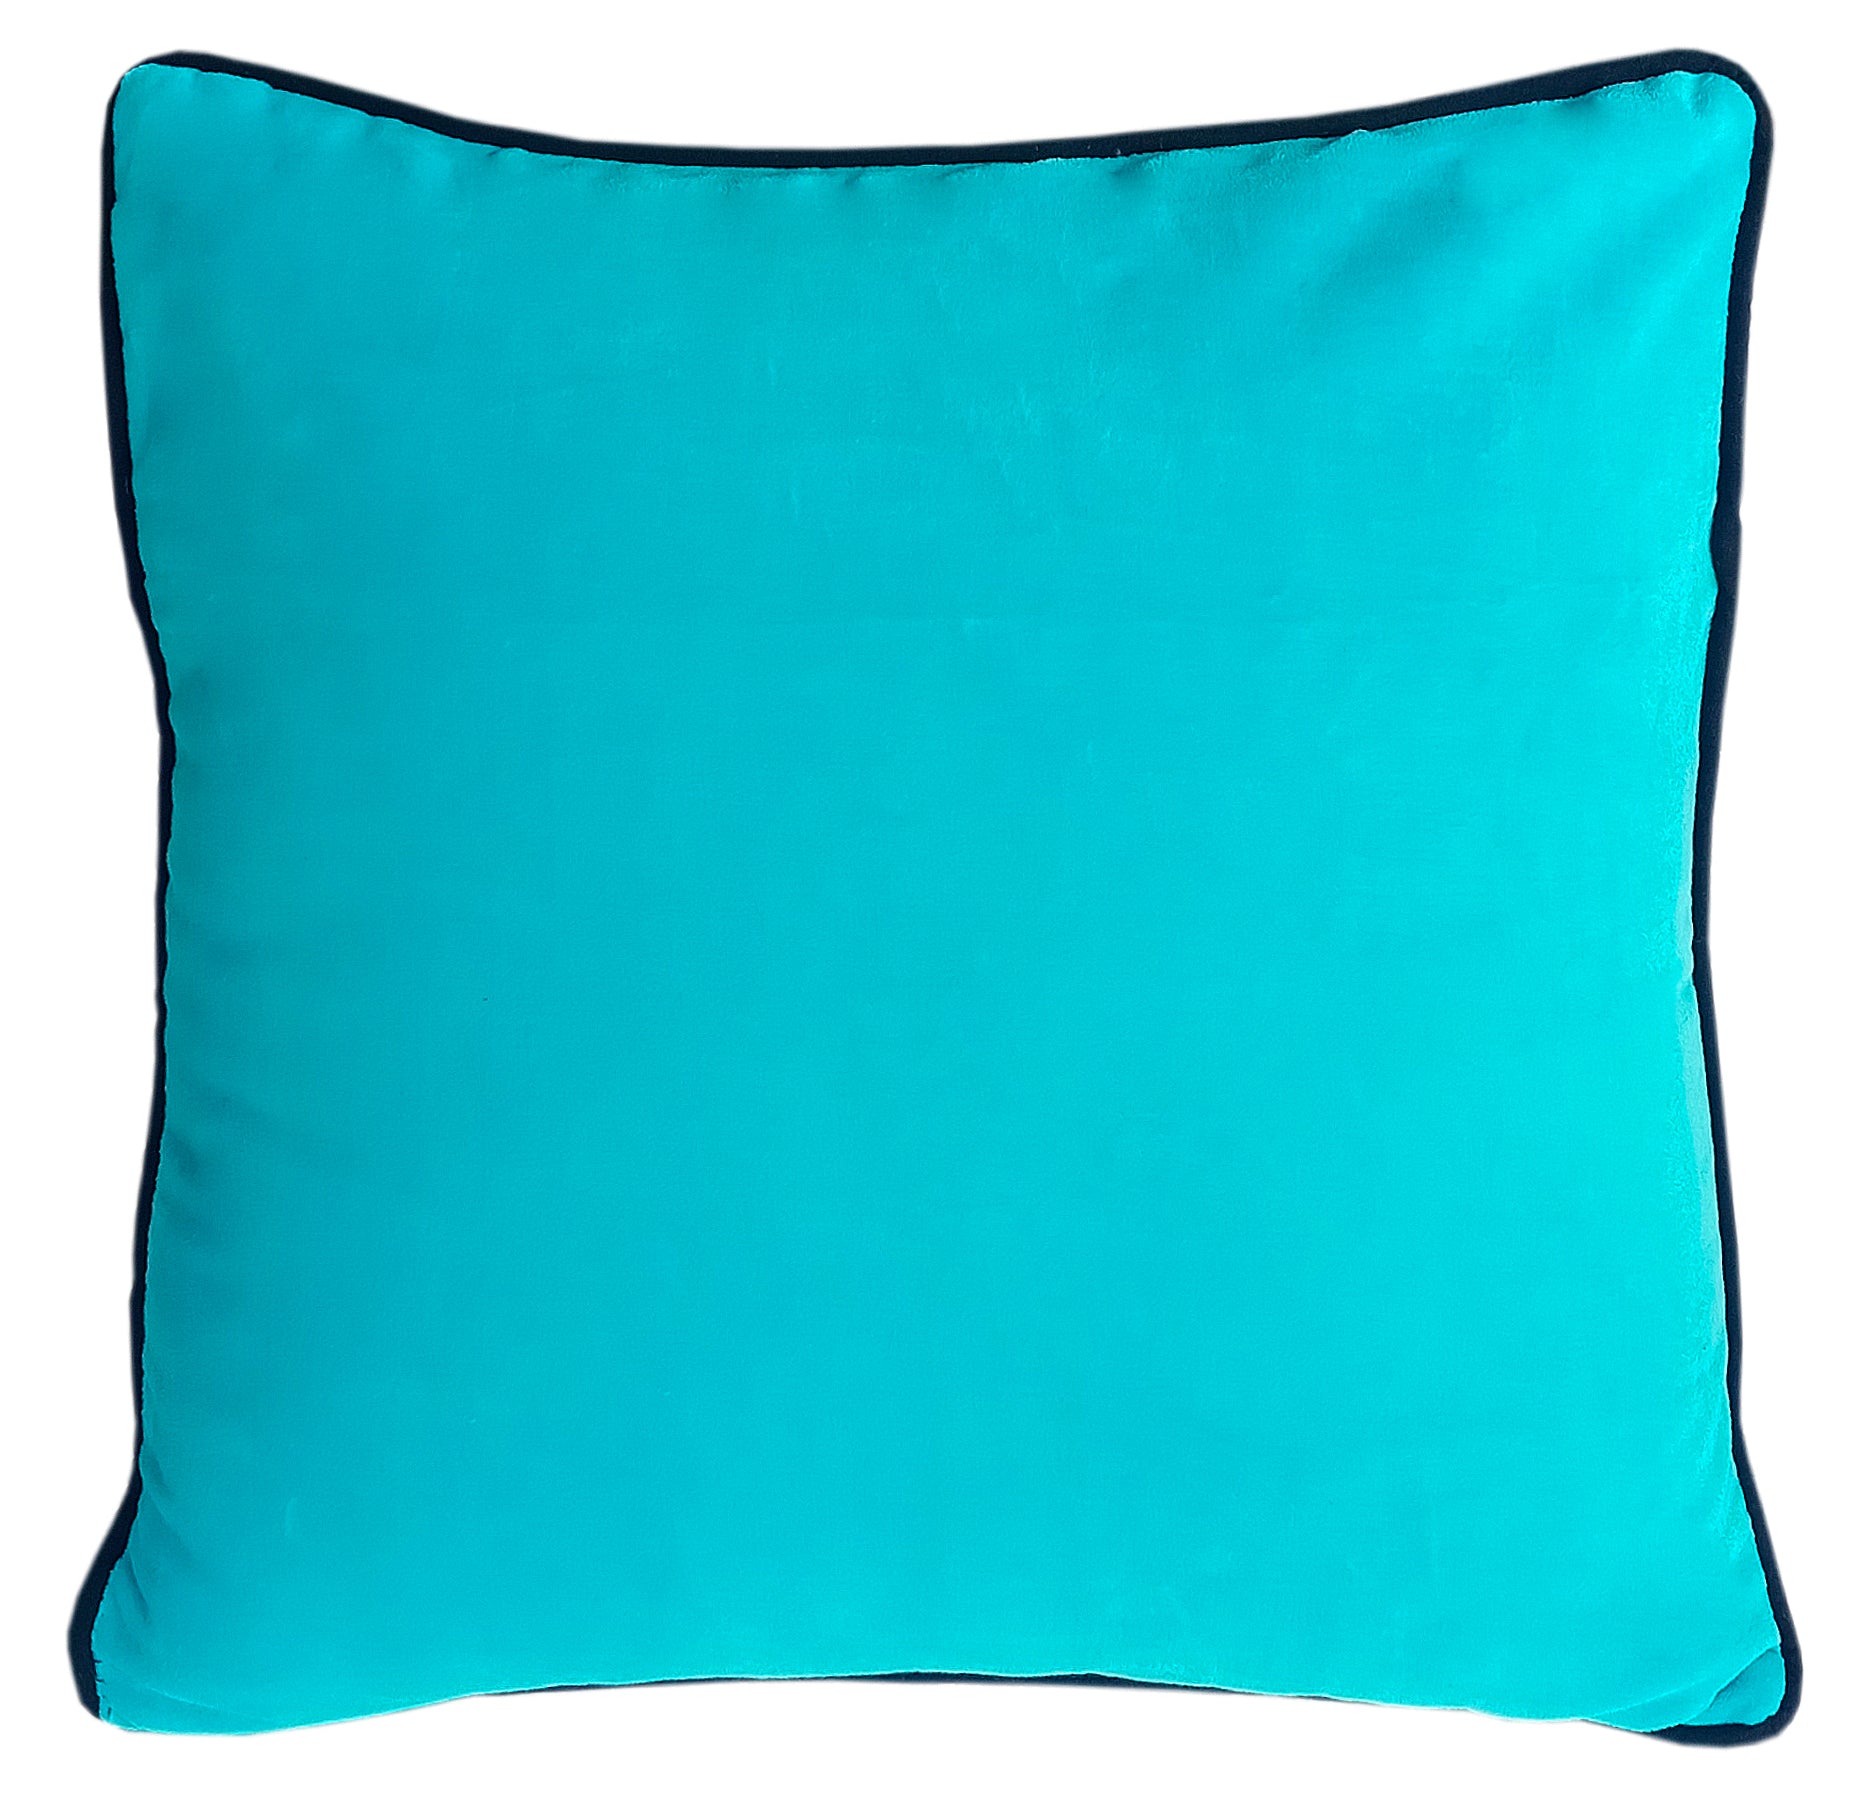 Sky Blue Velvet Cushion Cover with piping - The Teal Thread